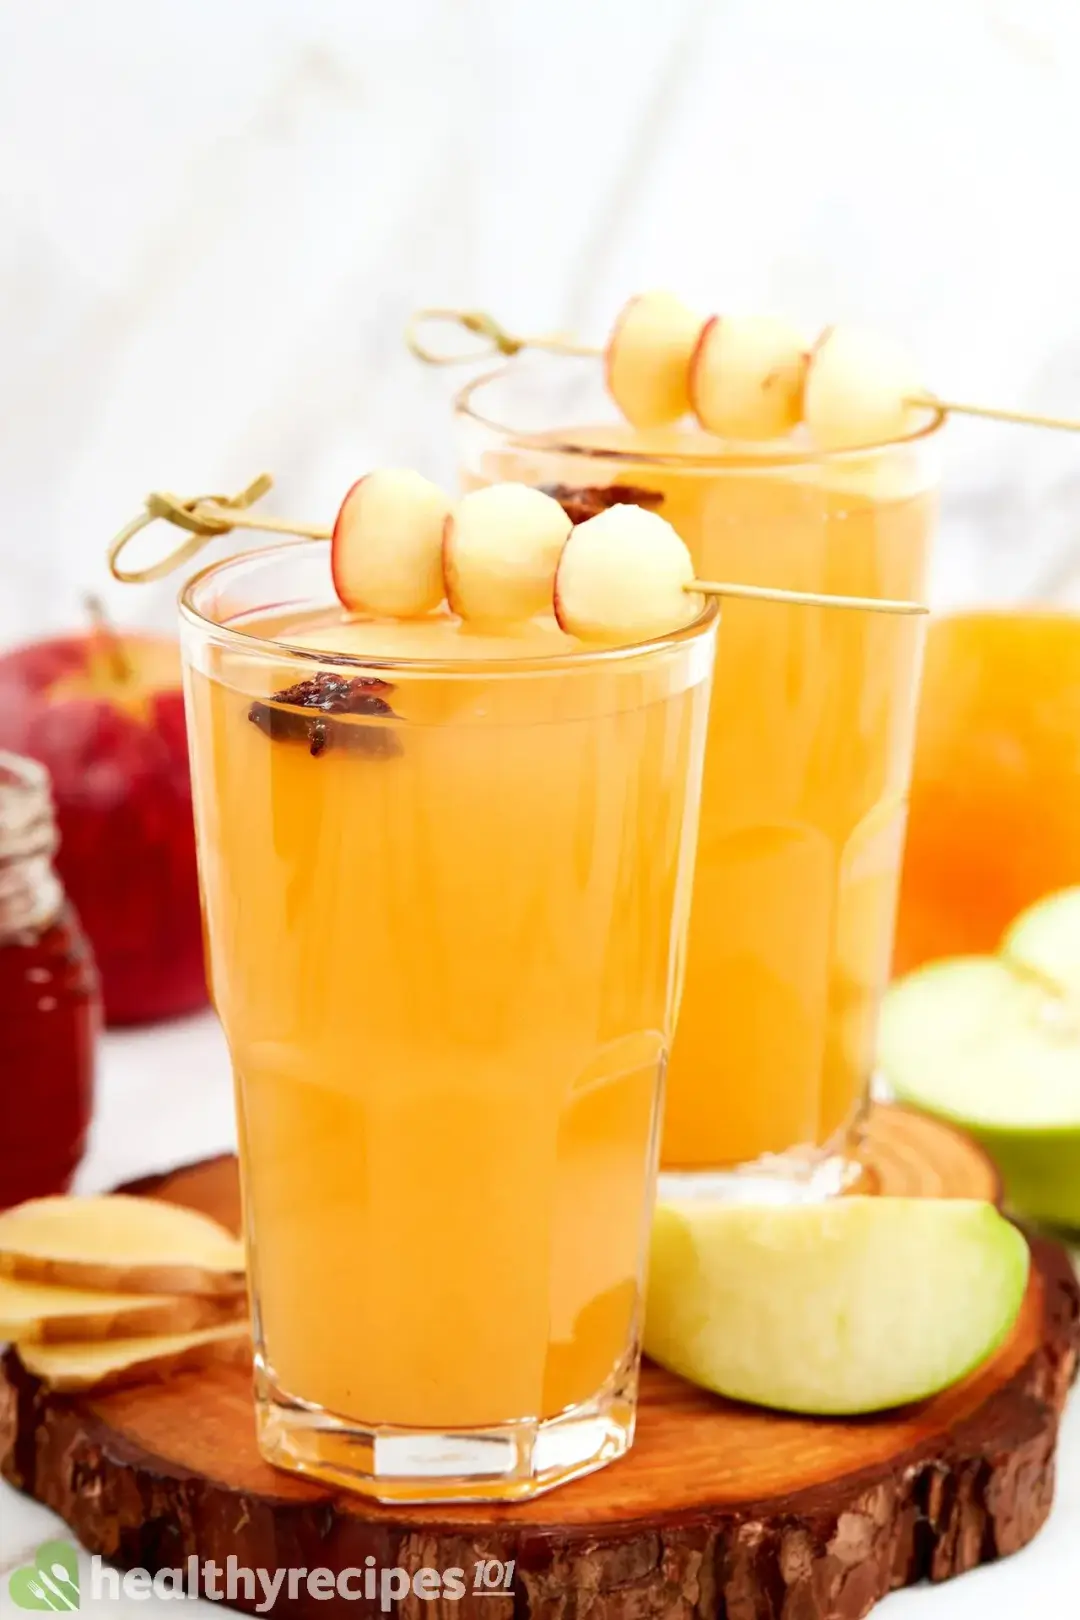 Two tall glasses filled to the top with hot toddy cocktail, garnished with star anise, apple ball skewers, and apple wedges